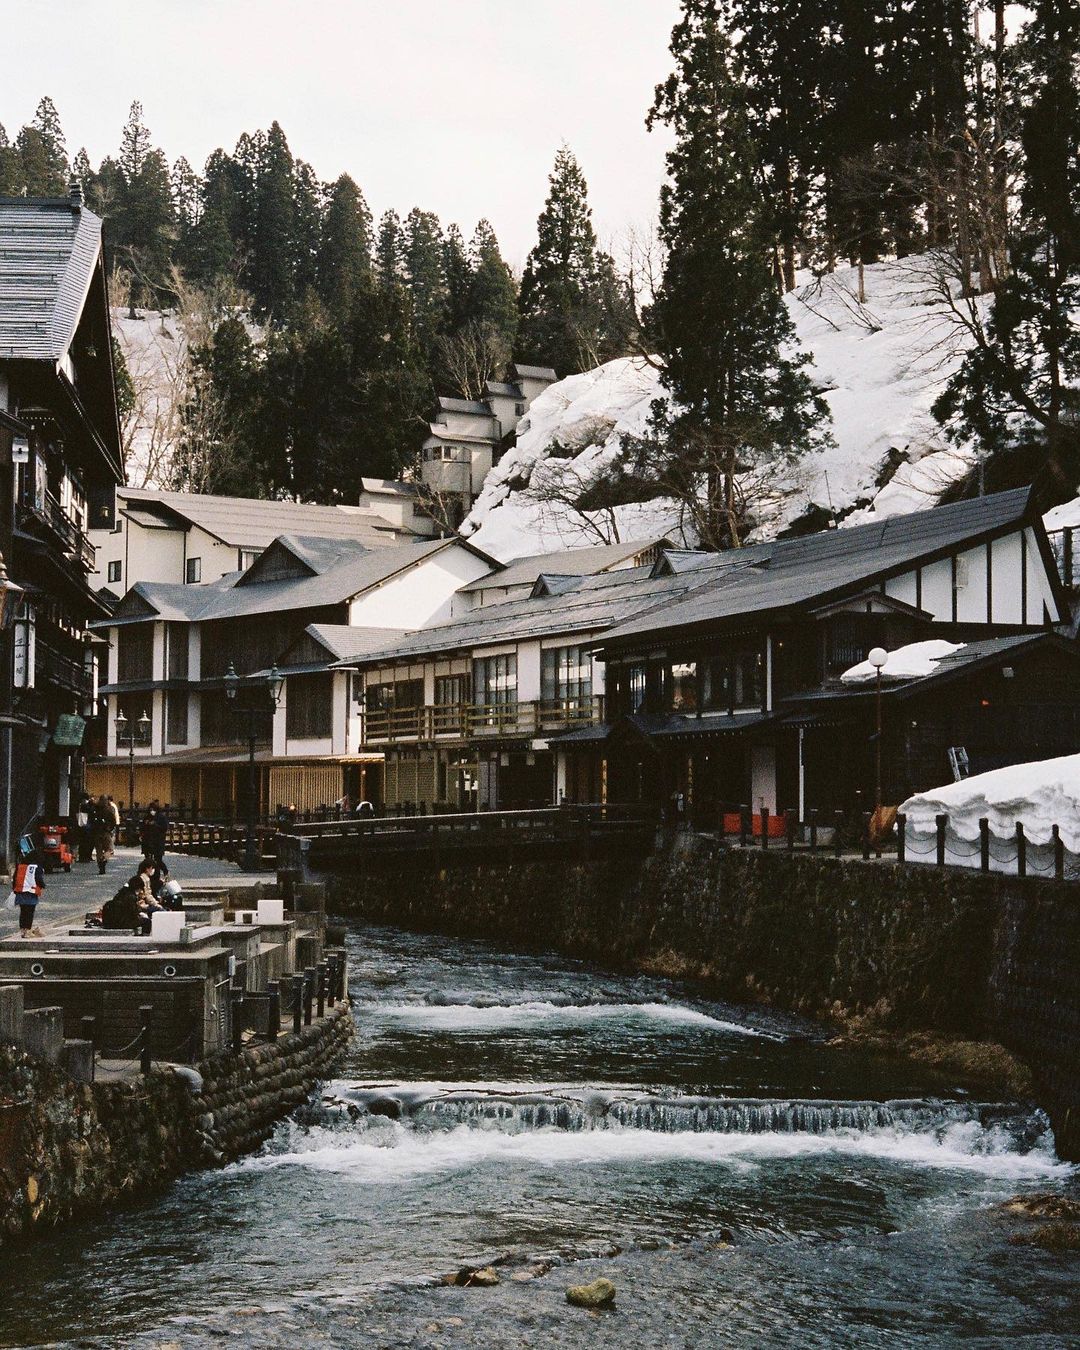 Cities in Japan to see snow - Ginzan Onsen